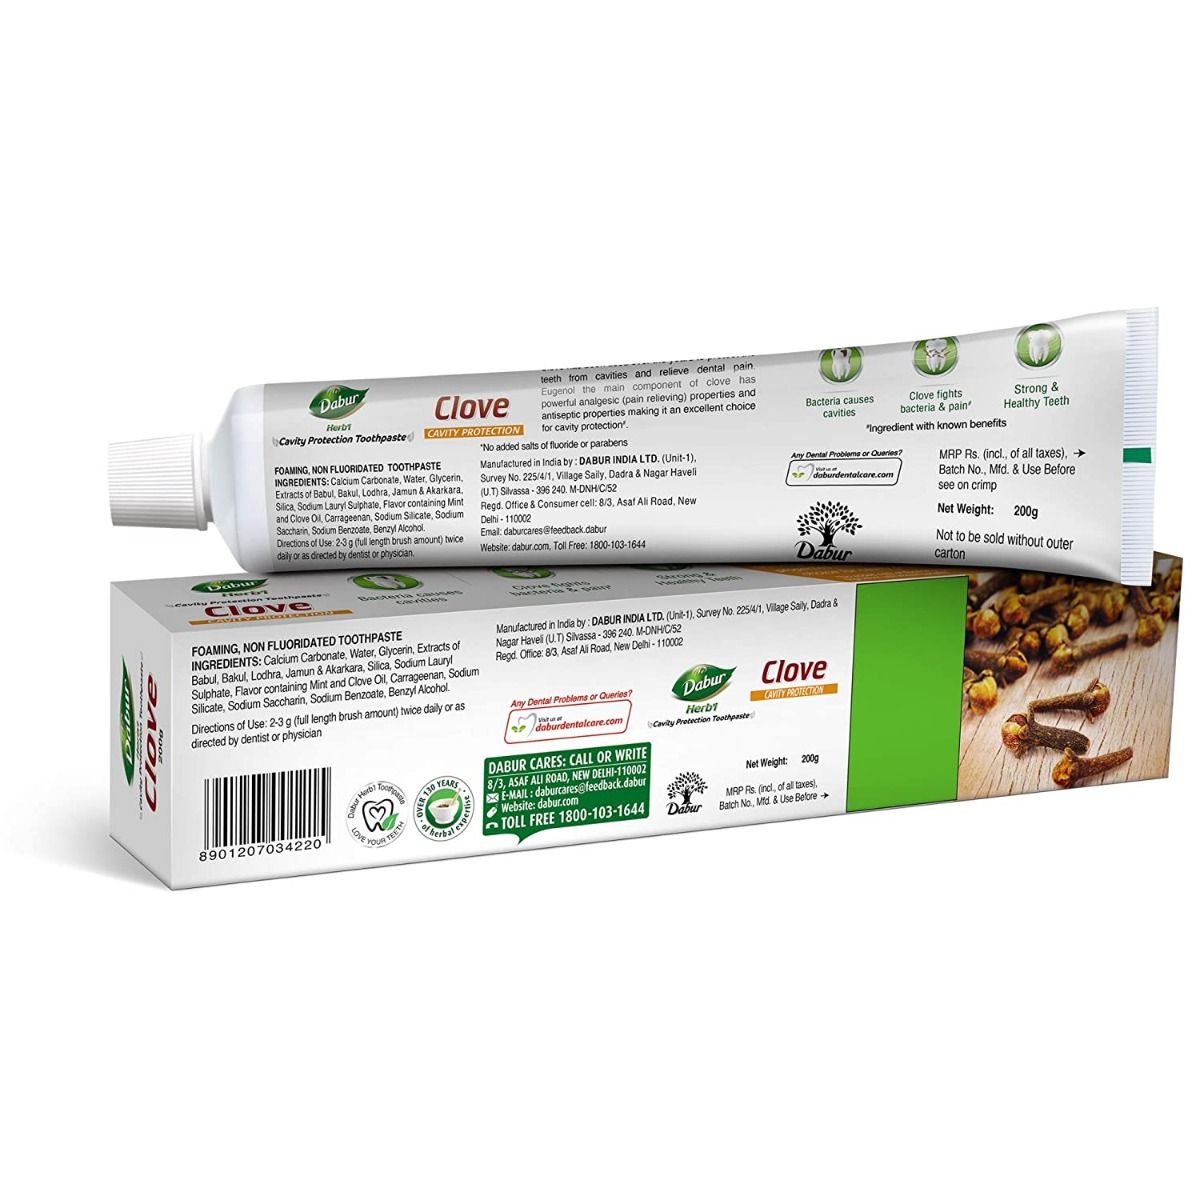 Dabur Herb'l Clove Cavity Protection Toothpaste, 100 gm, Pack of 1 